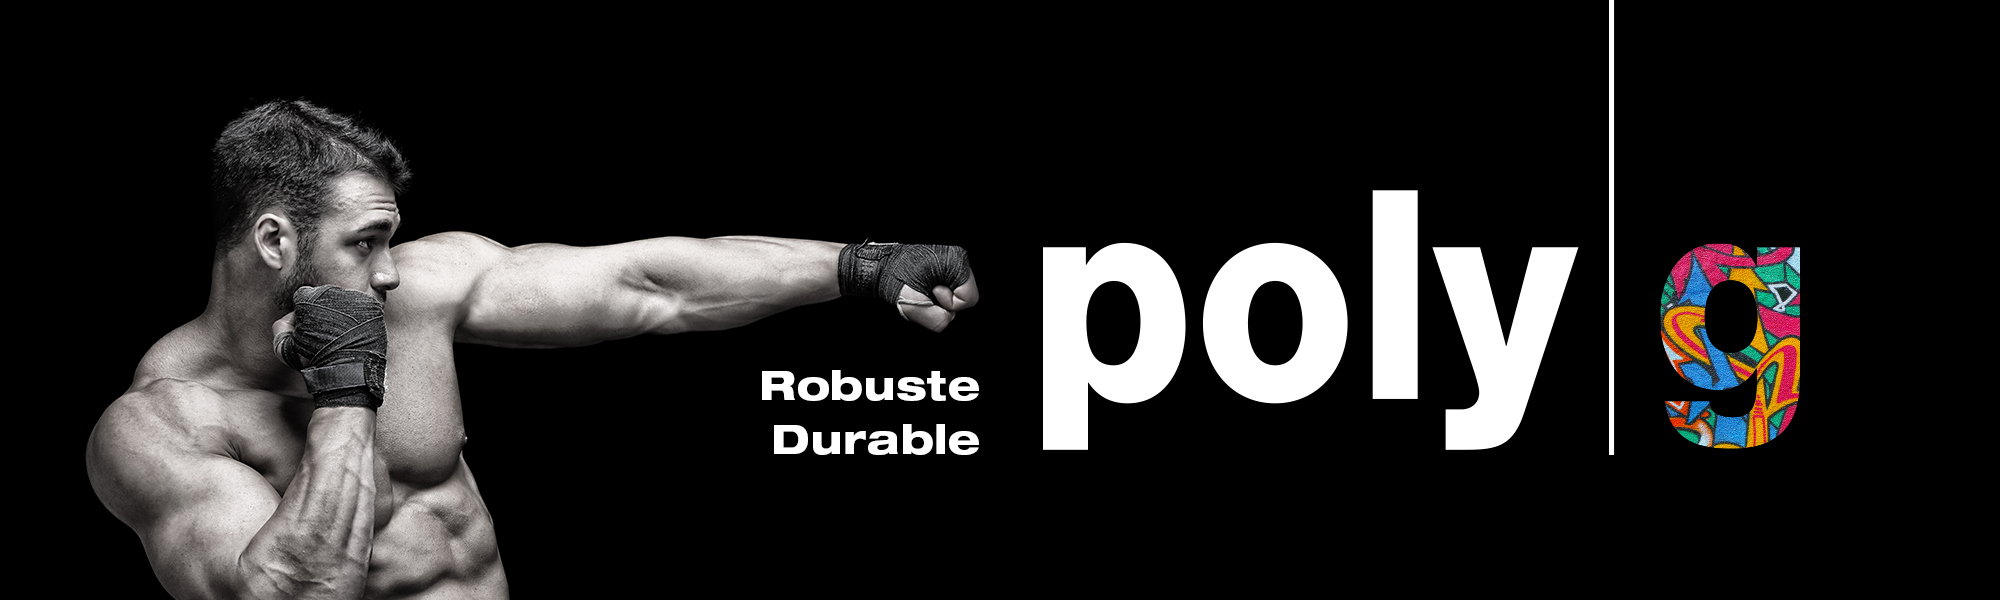 Papiers polyester robuste et durables Poly G